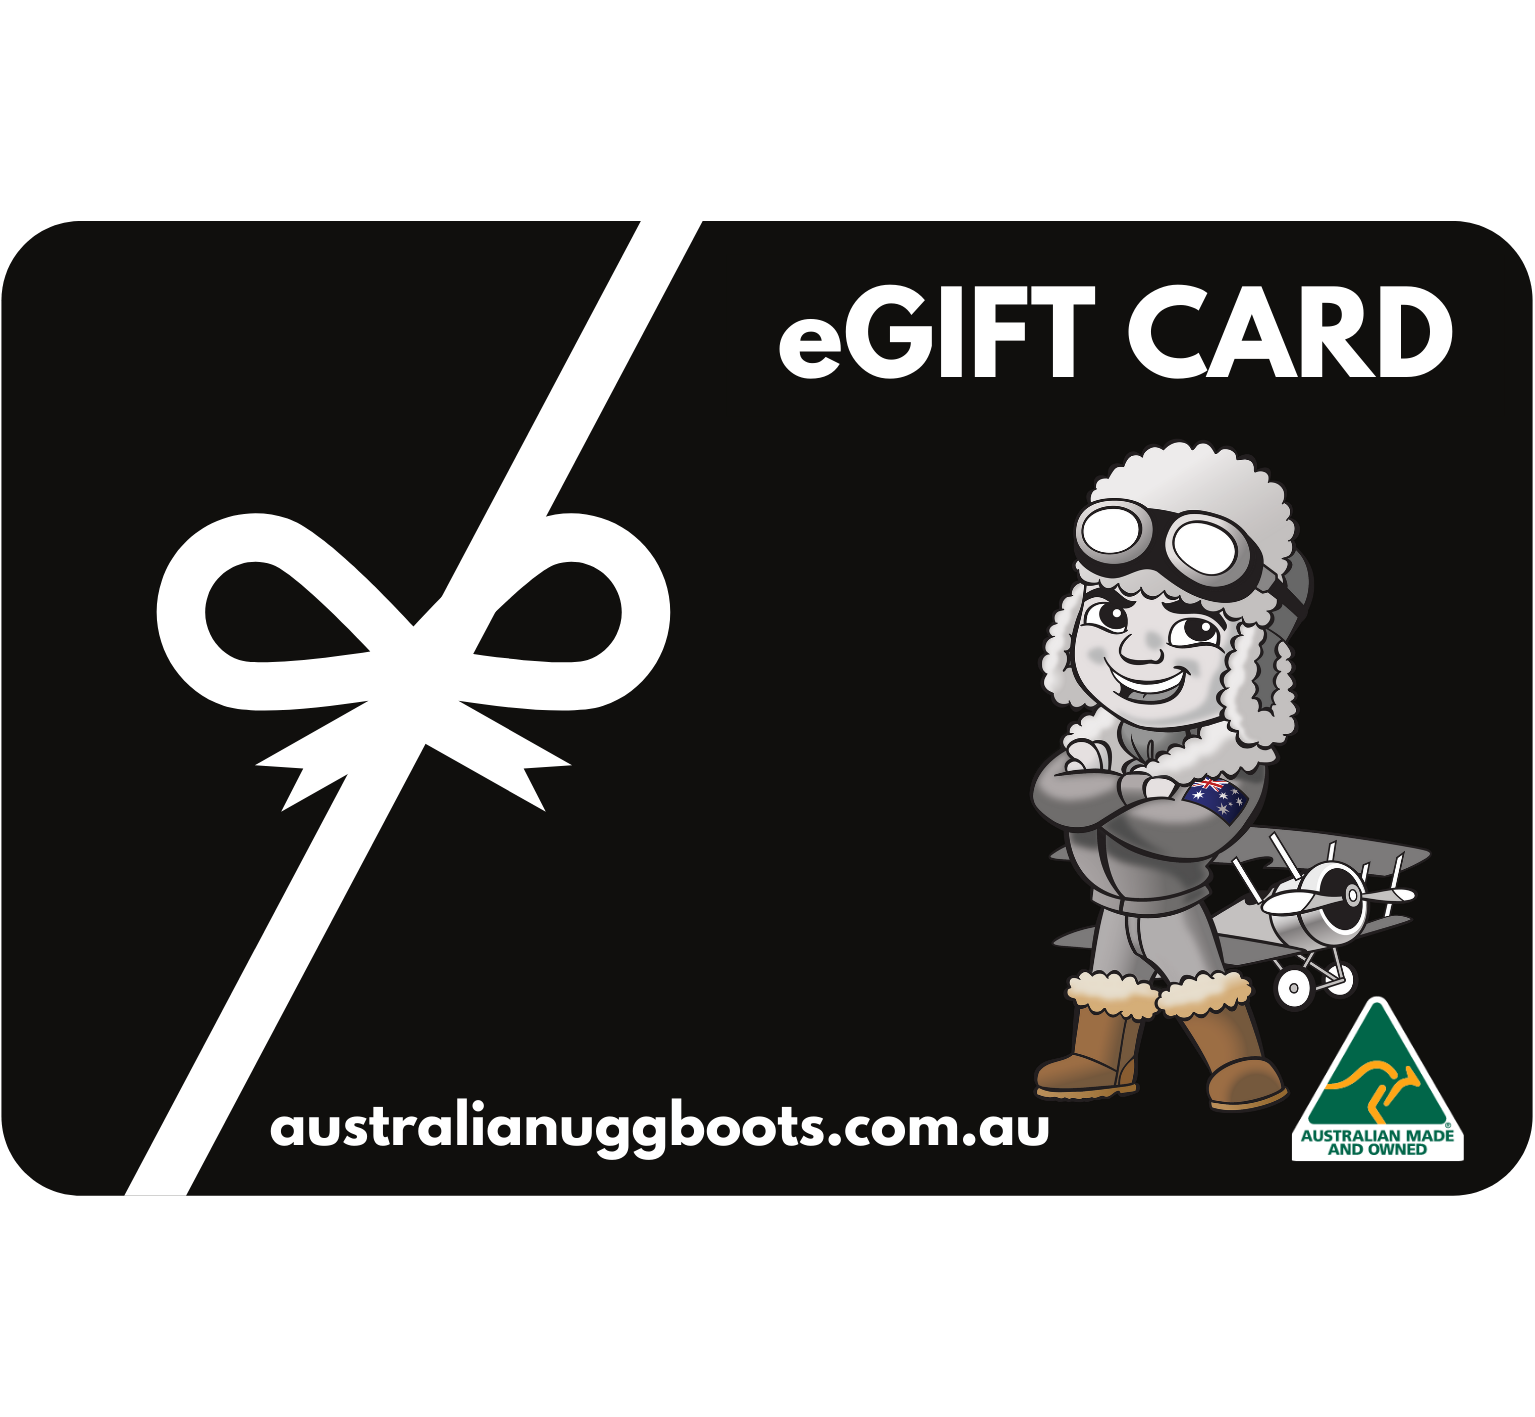 Picture of an egiftcard